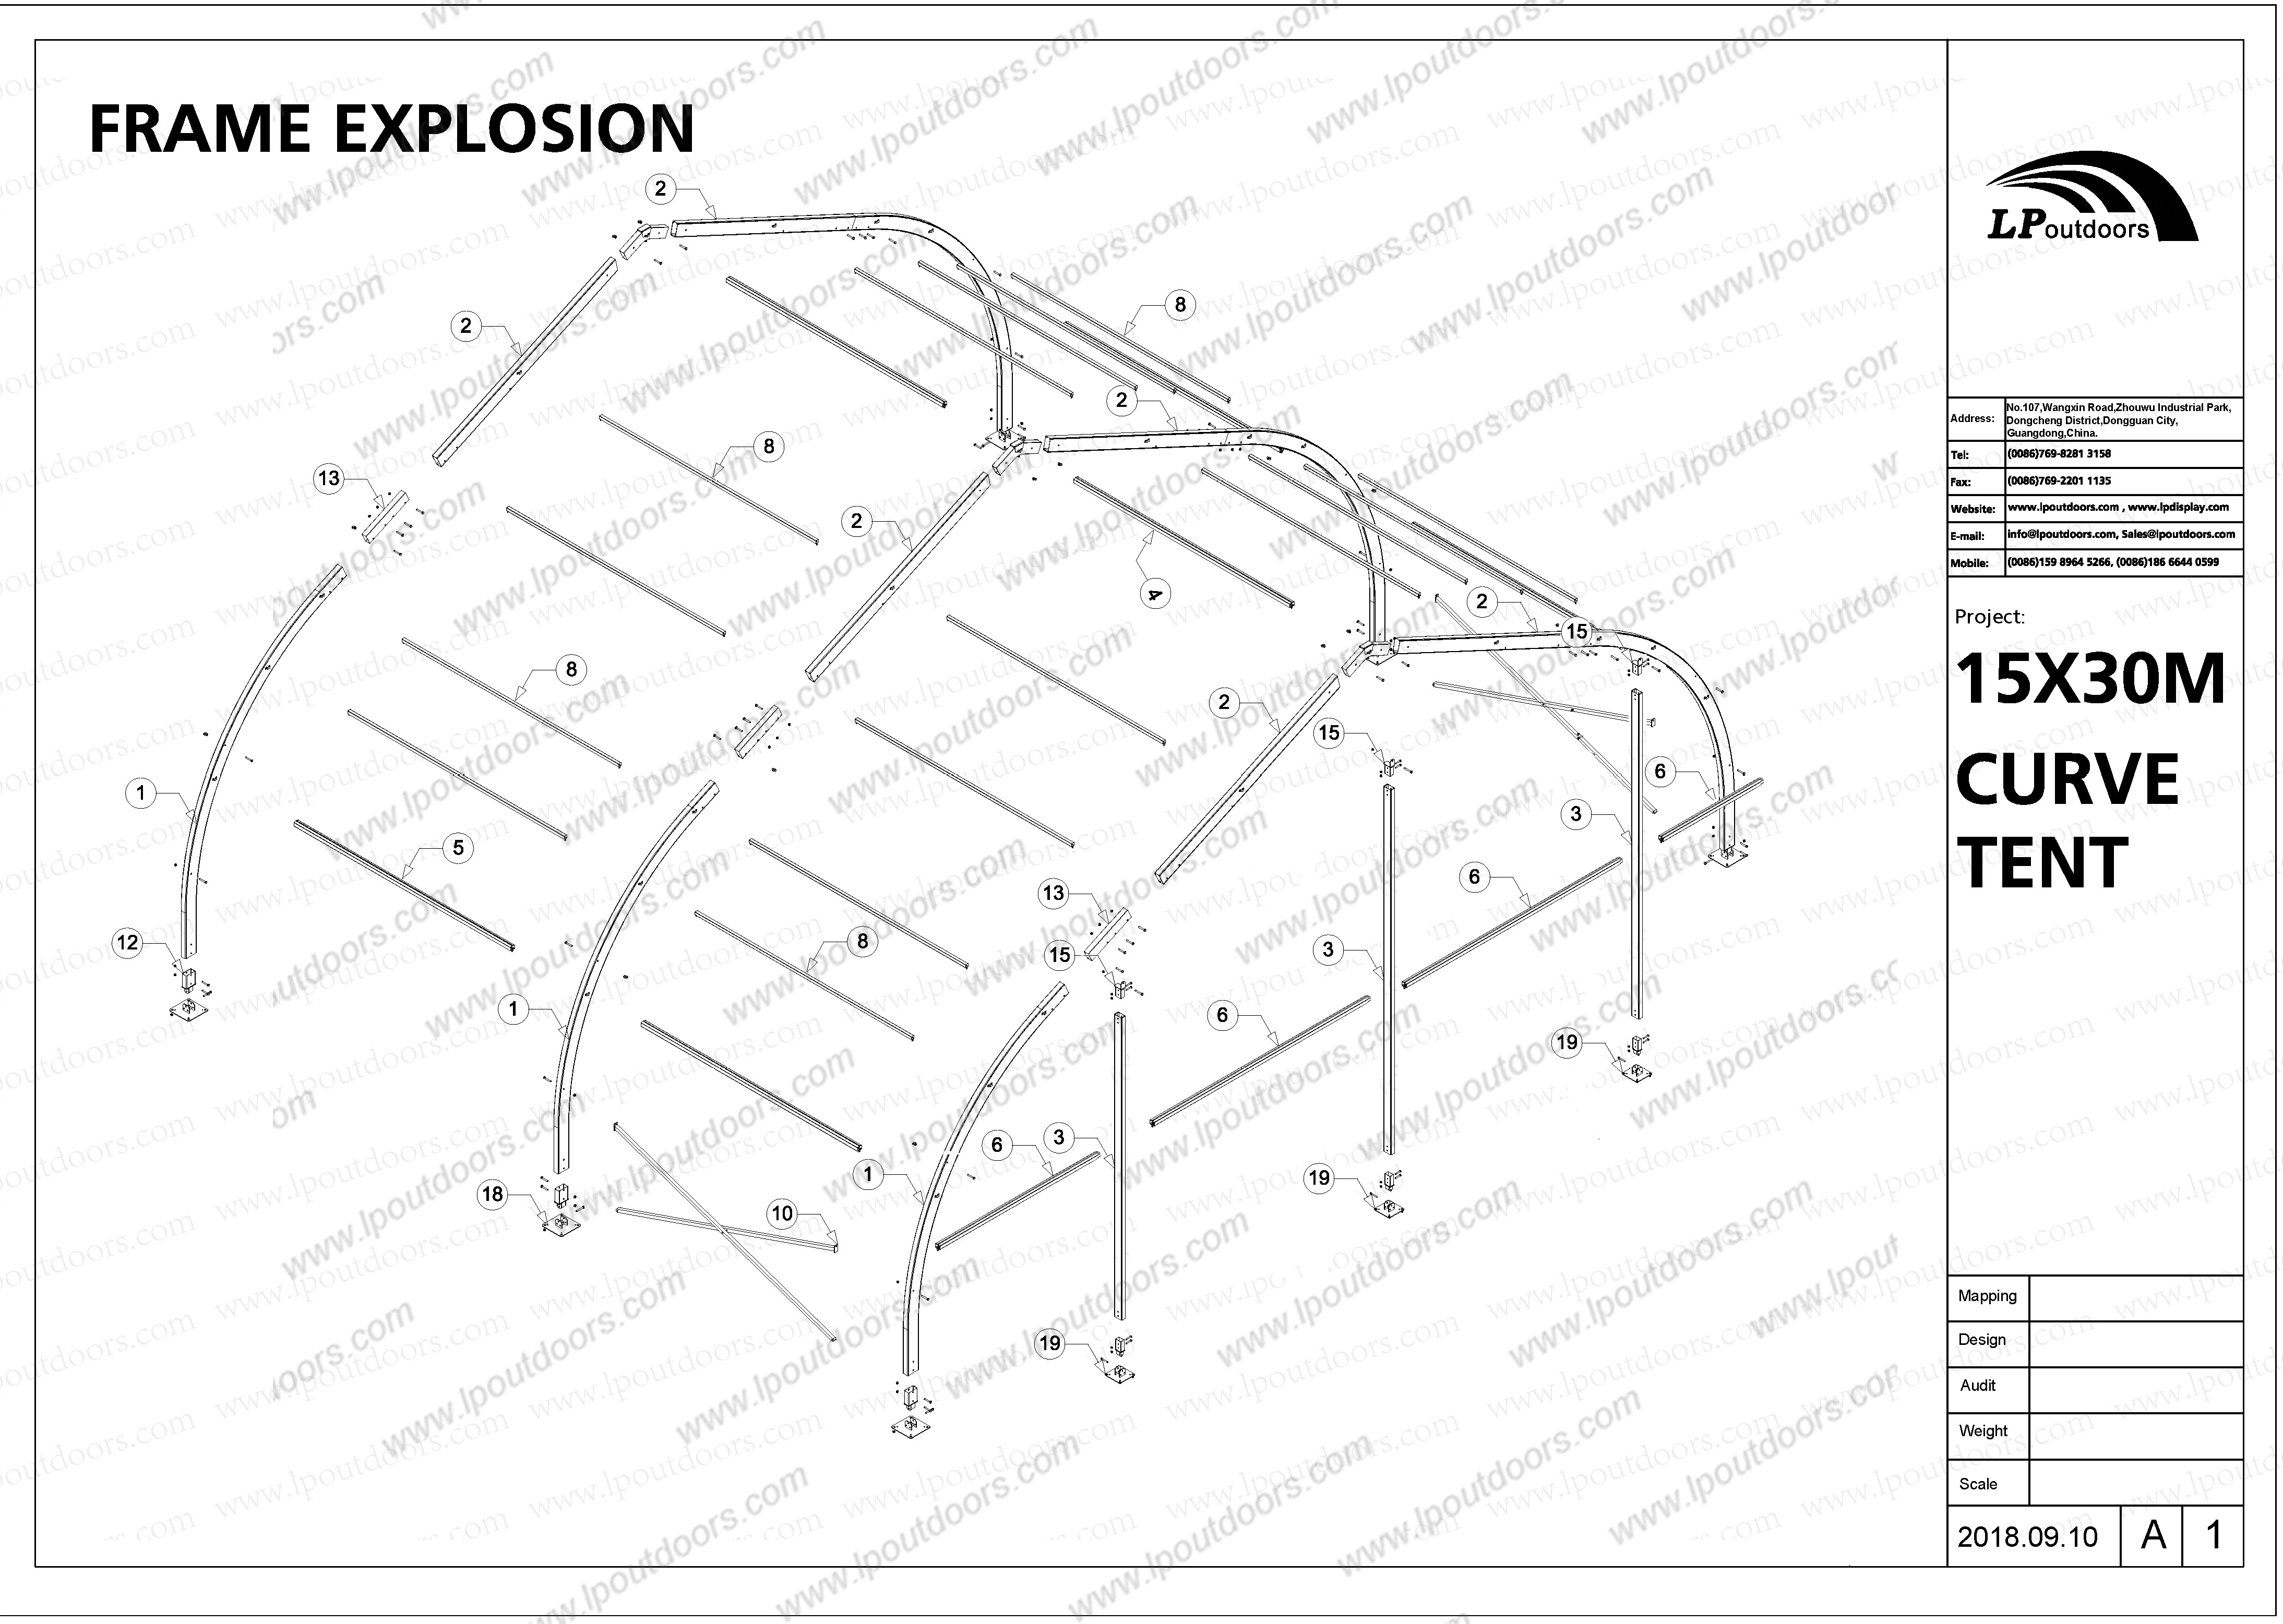 specification of 15m curve tent